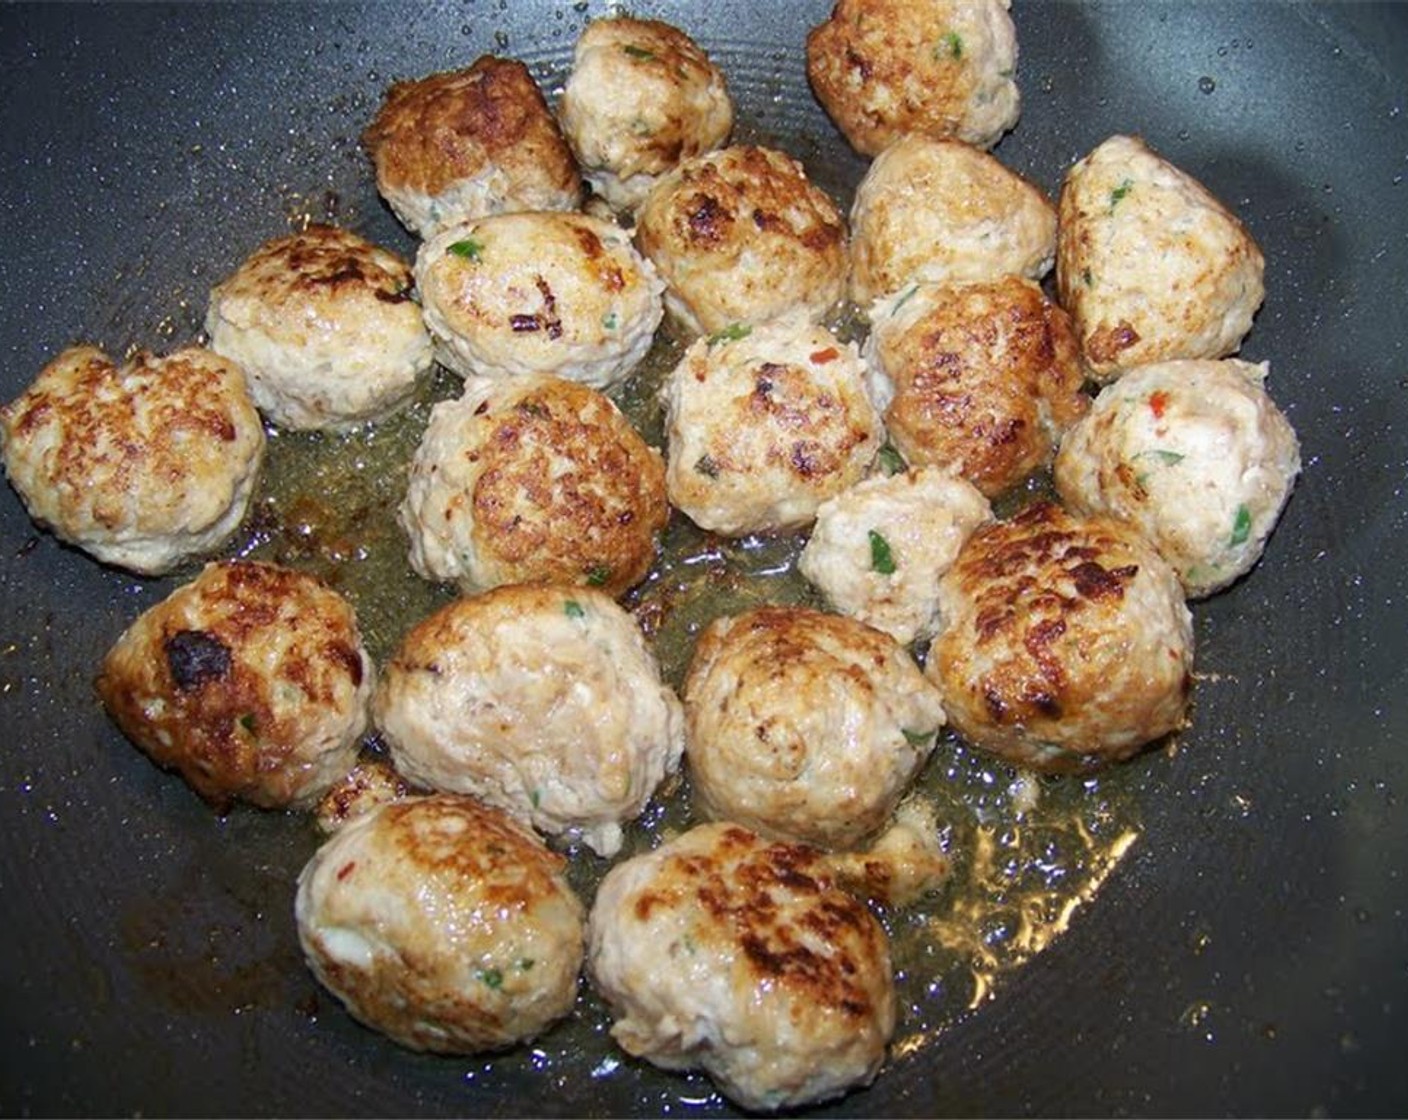 step 5 Once meatballs are browned, transfer to a plate and set aside until they are finished off in the sauce. Reserve the oil from frying the meatballs in the pan to make the sauce.